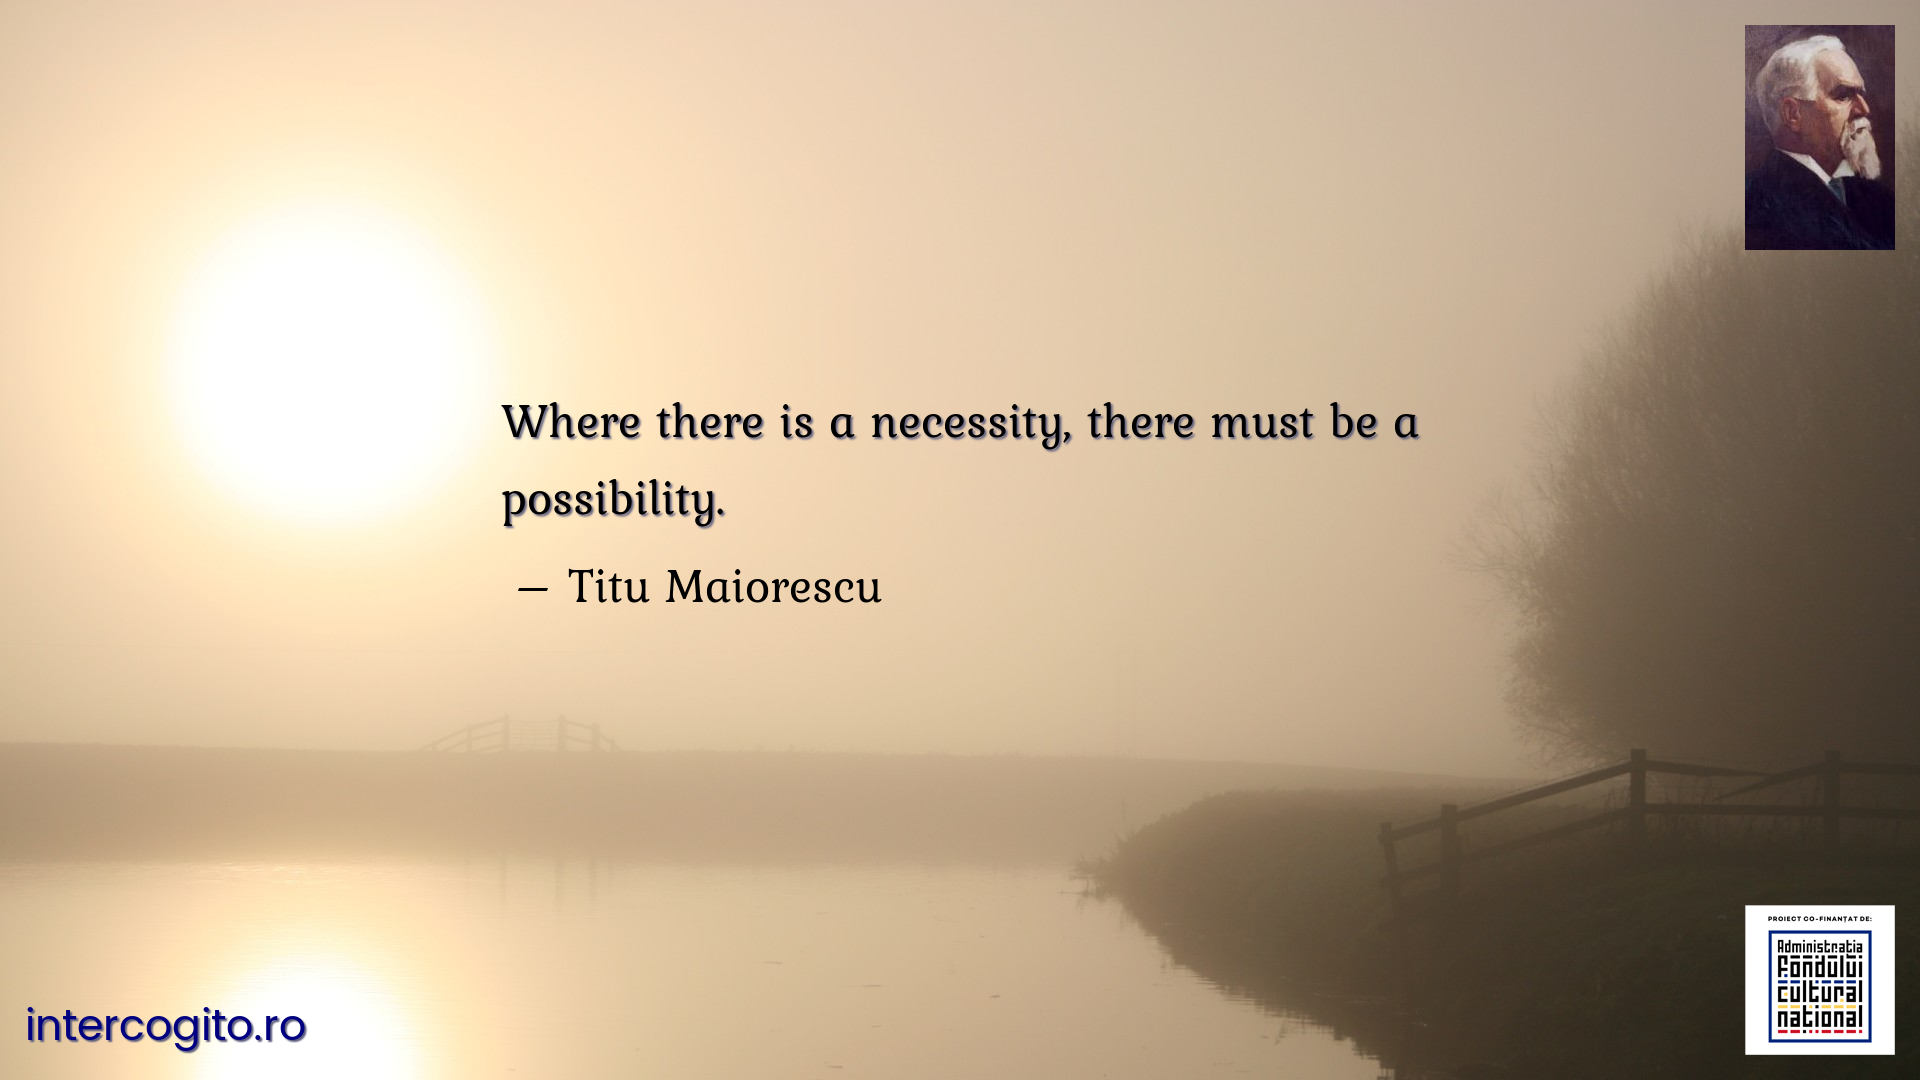 Where there is a necessity, there must be a possibility.